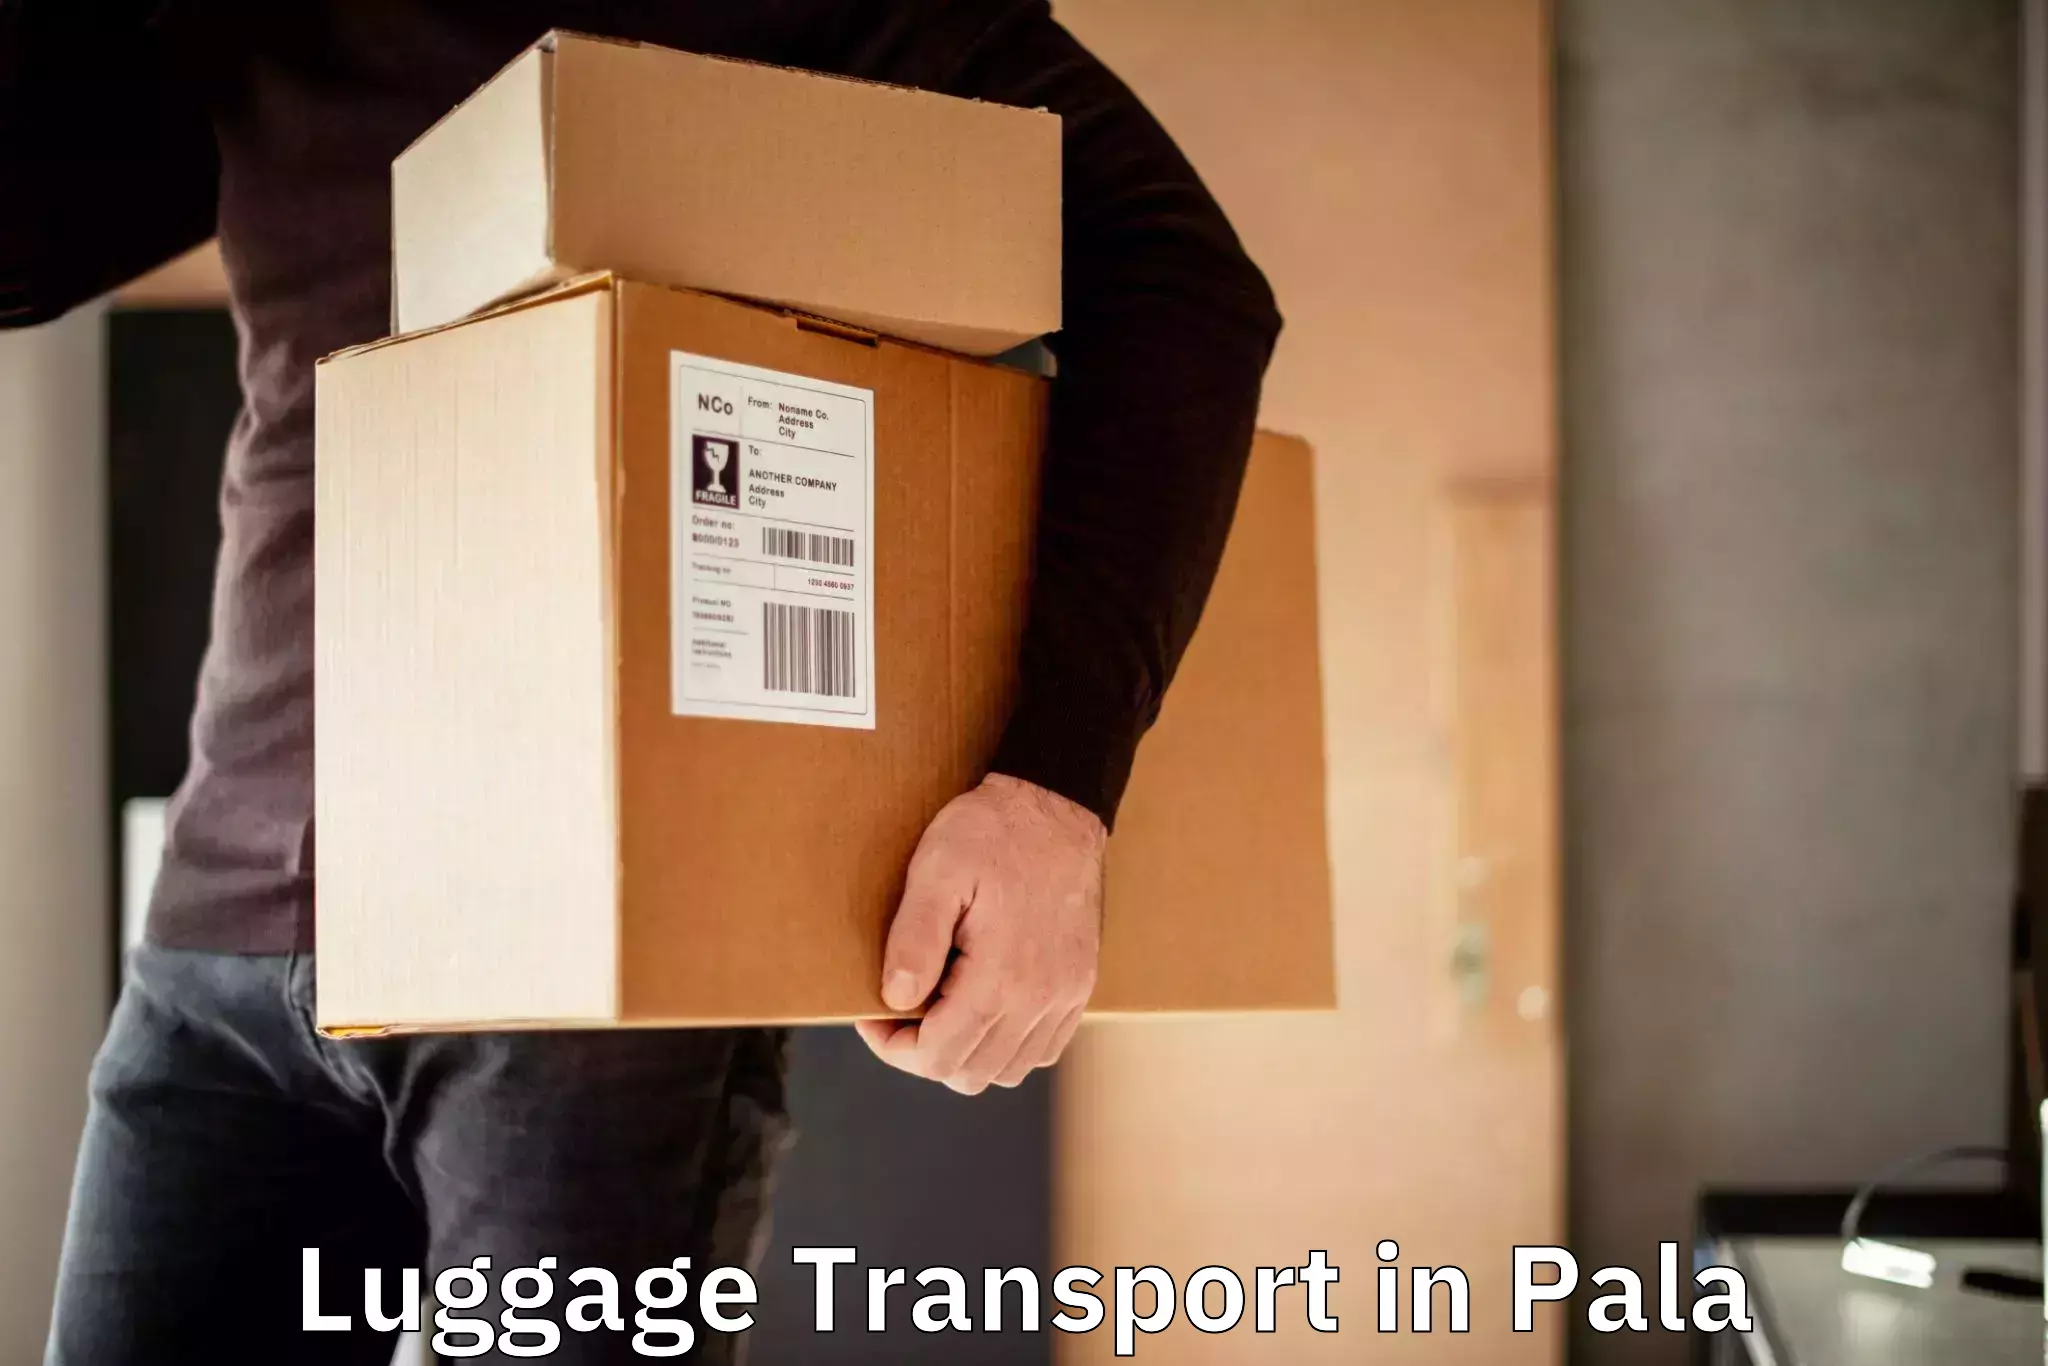 Luggage transport consulting in Pala